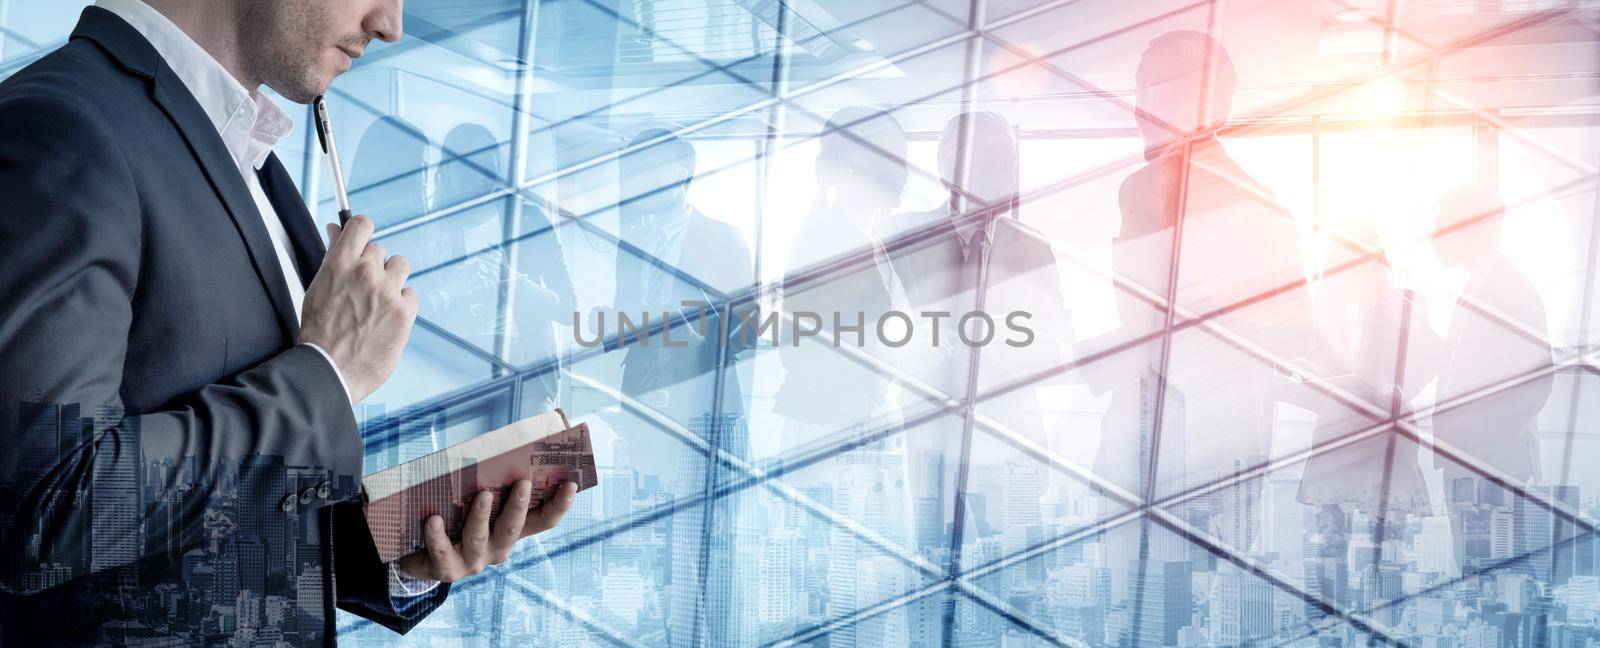 Double Exposure Image of Success Business People on abstract modern city background. Future business and communication technology concept. Surreal futuristic multiple exposure graphic interface.